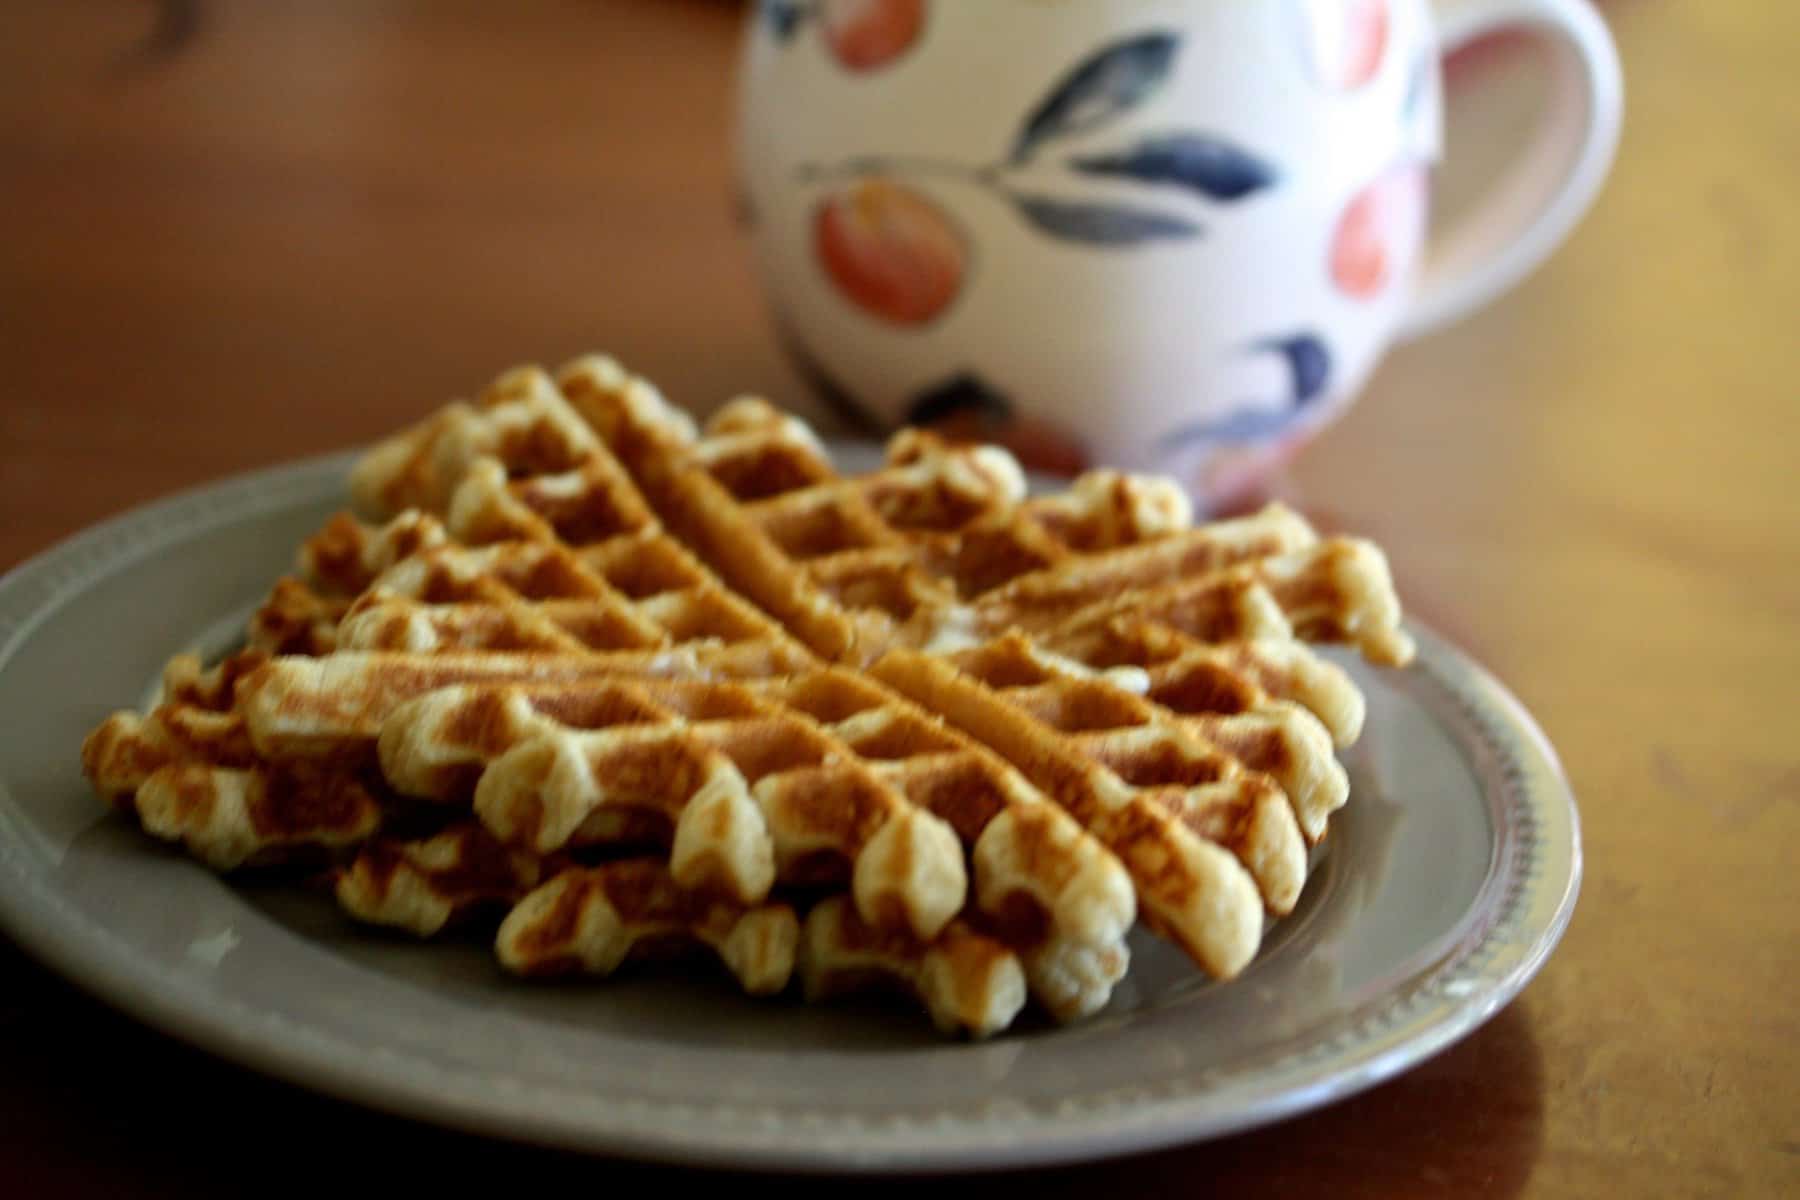 A colorful cup of coffee sits behind a plate of whole grain waffles.